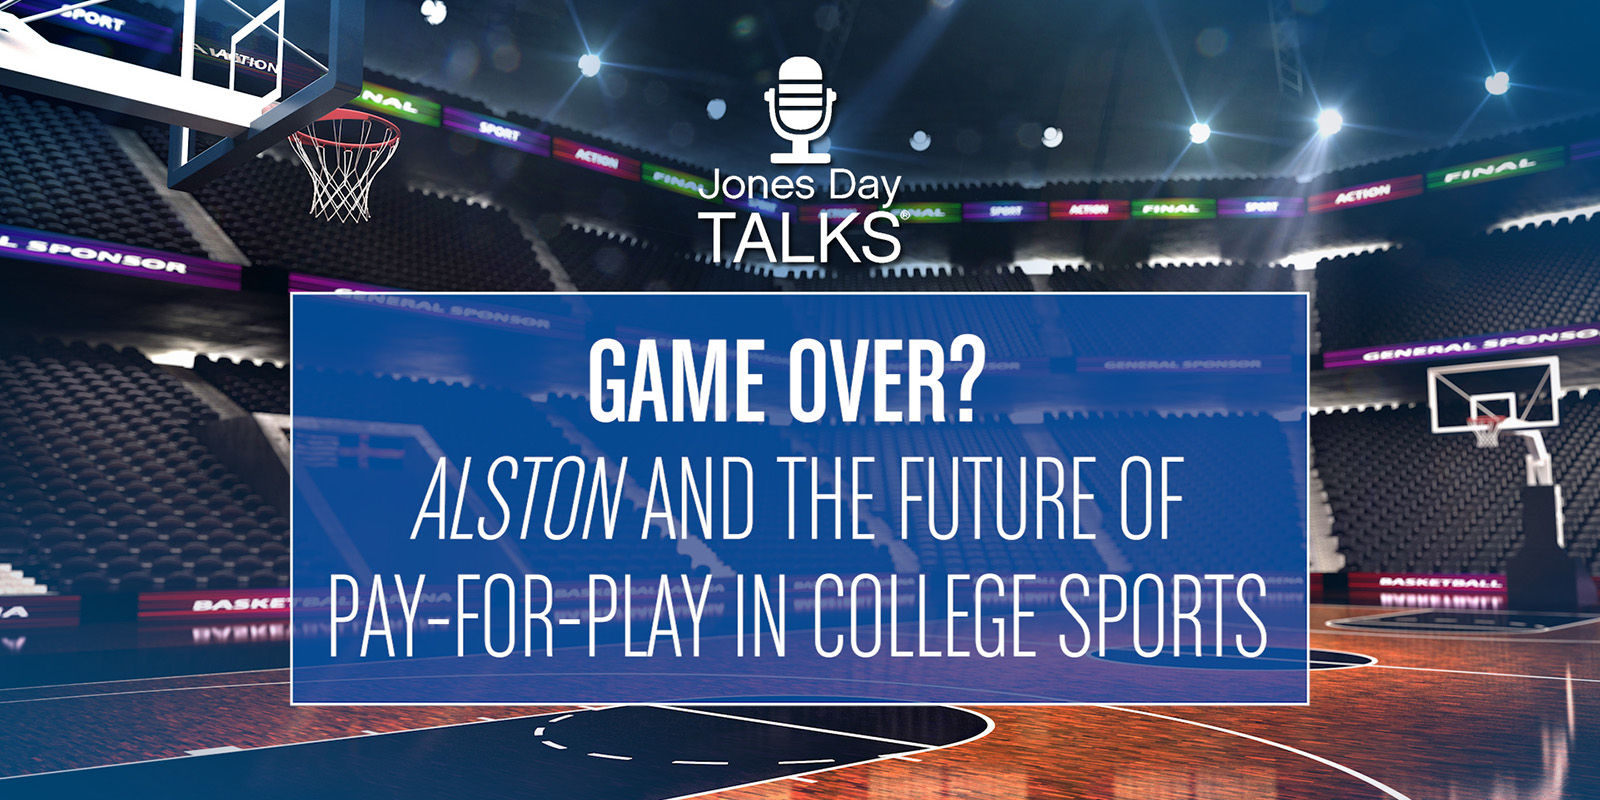 Jones Day Talks: Game Over? Alston and the Future of Pay-for-Play in College Sports